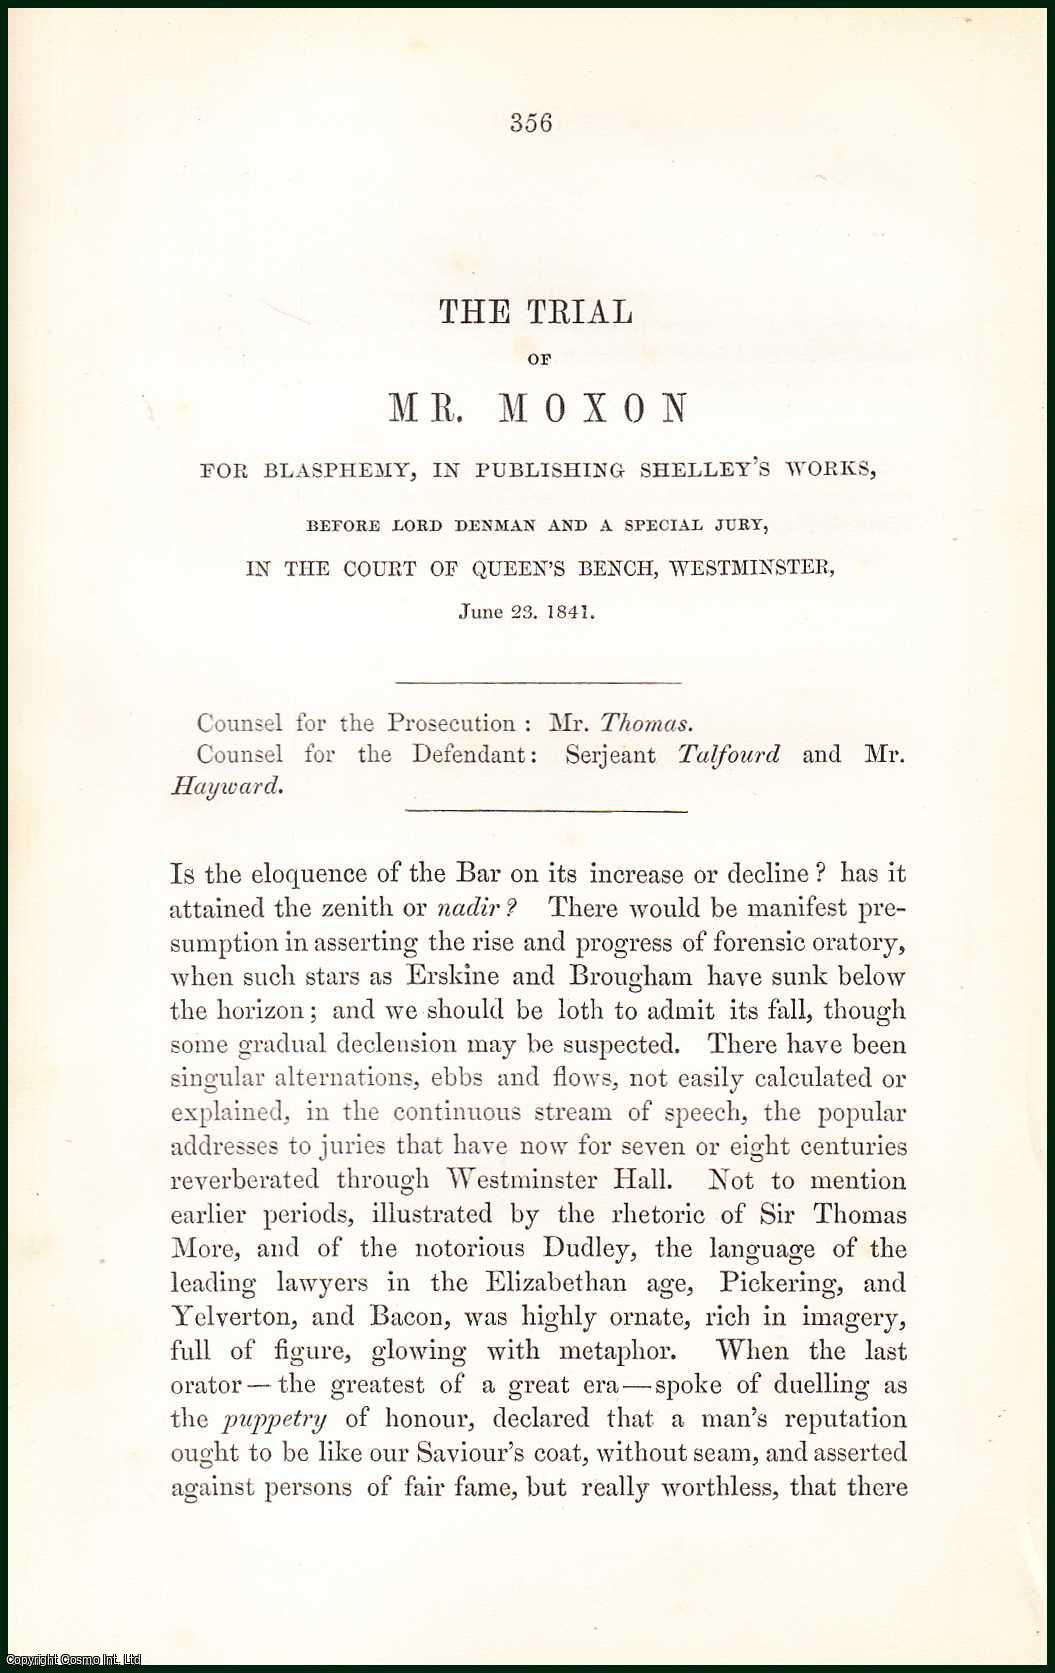 [Trial] - The Trial of Mr. Moxon for Blasphemy, in Publishing Shelley's Works, Before Lord Denman & a Special Jury, in The Court of Queen's Bench, Wesminster, 1841. An uncommon original article from the Collected State Trials, 1850.